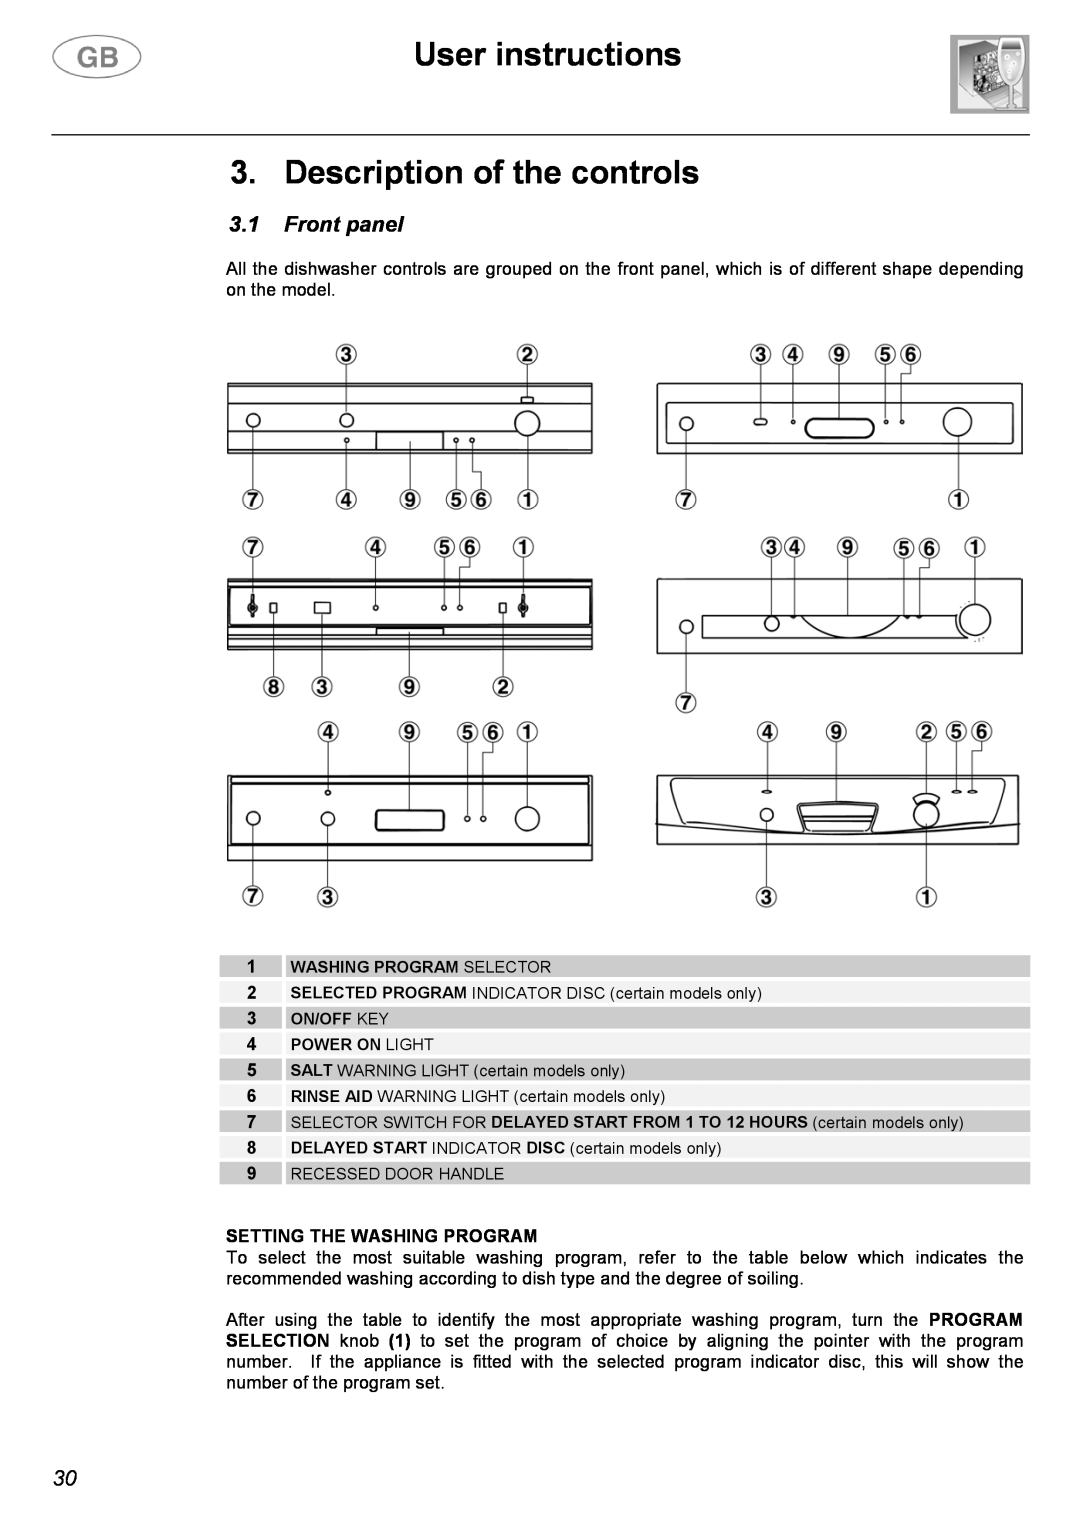 Smeg CA01-1 User instructions 3. Description of the controls, 3.1Front panel, Setting The Washing Program 